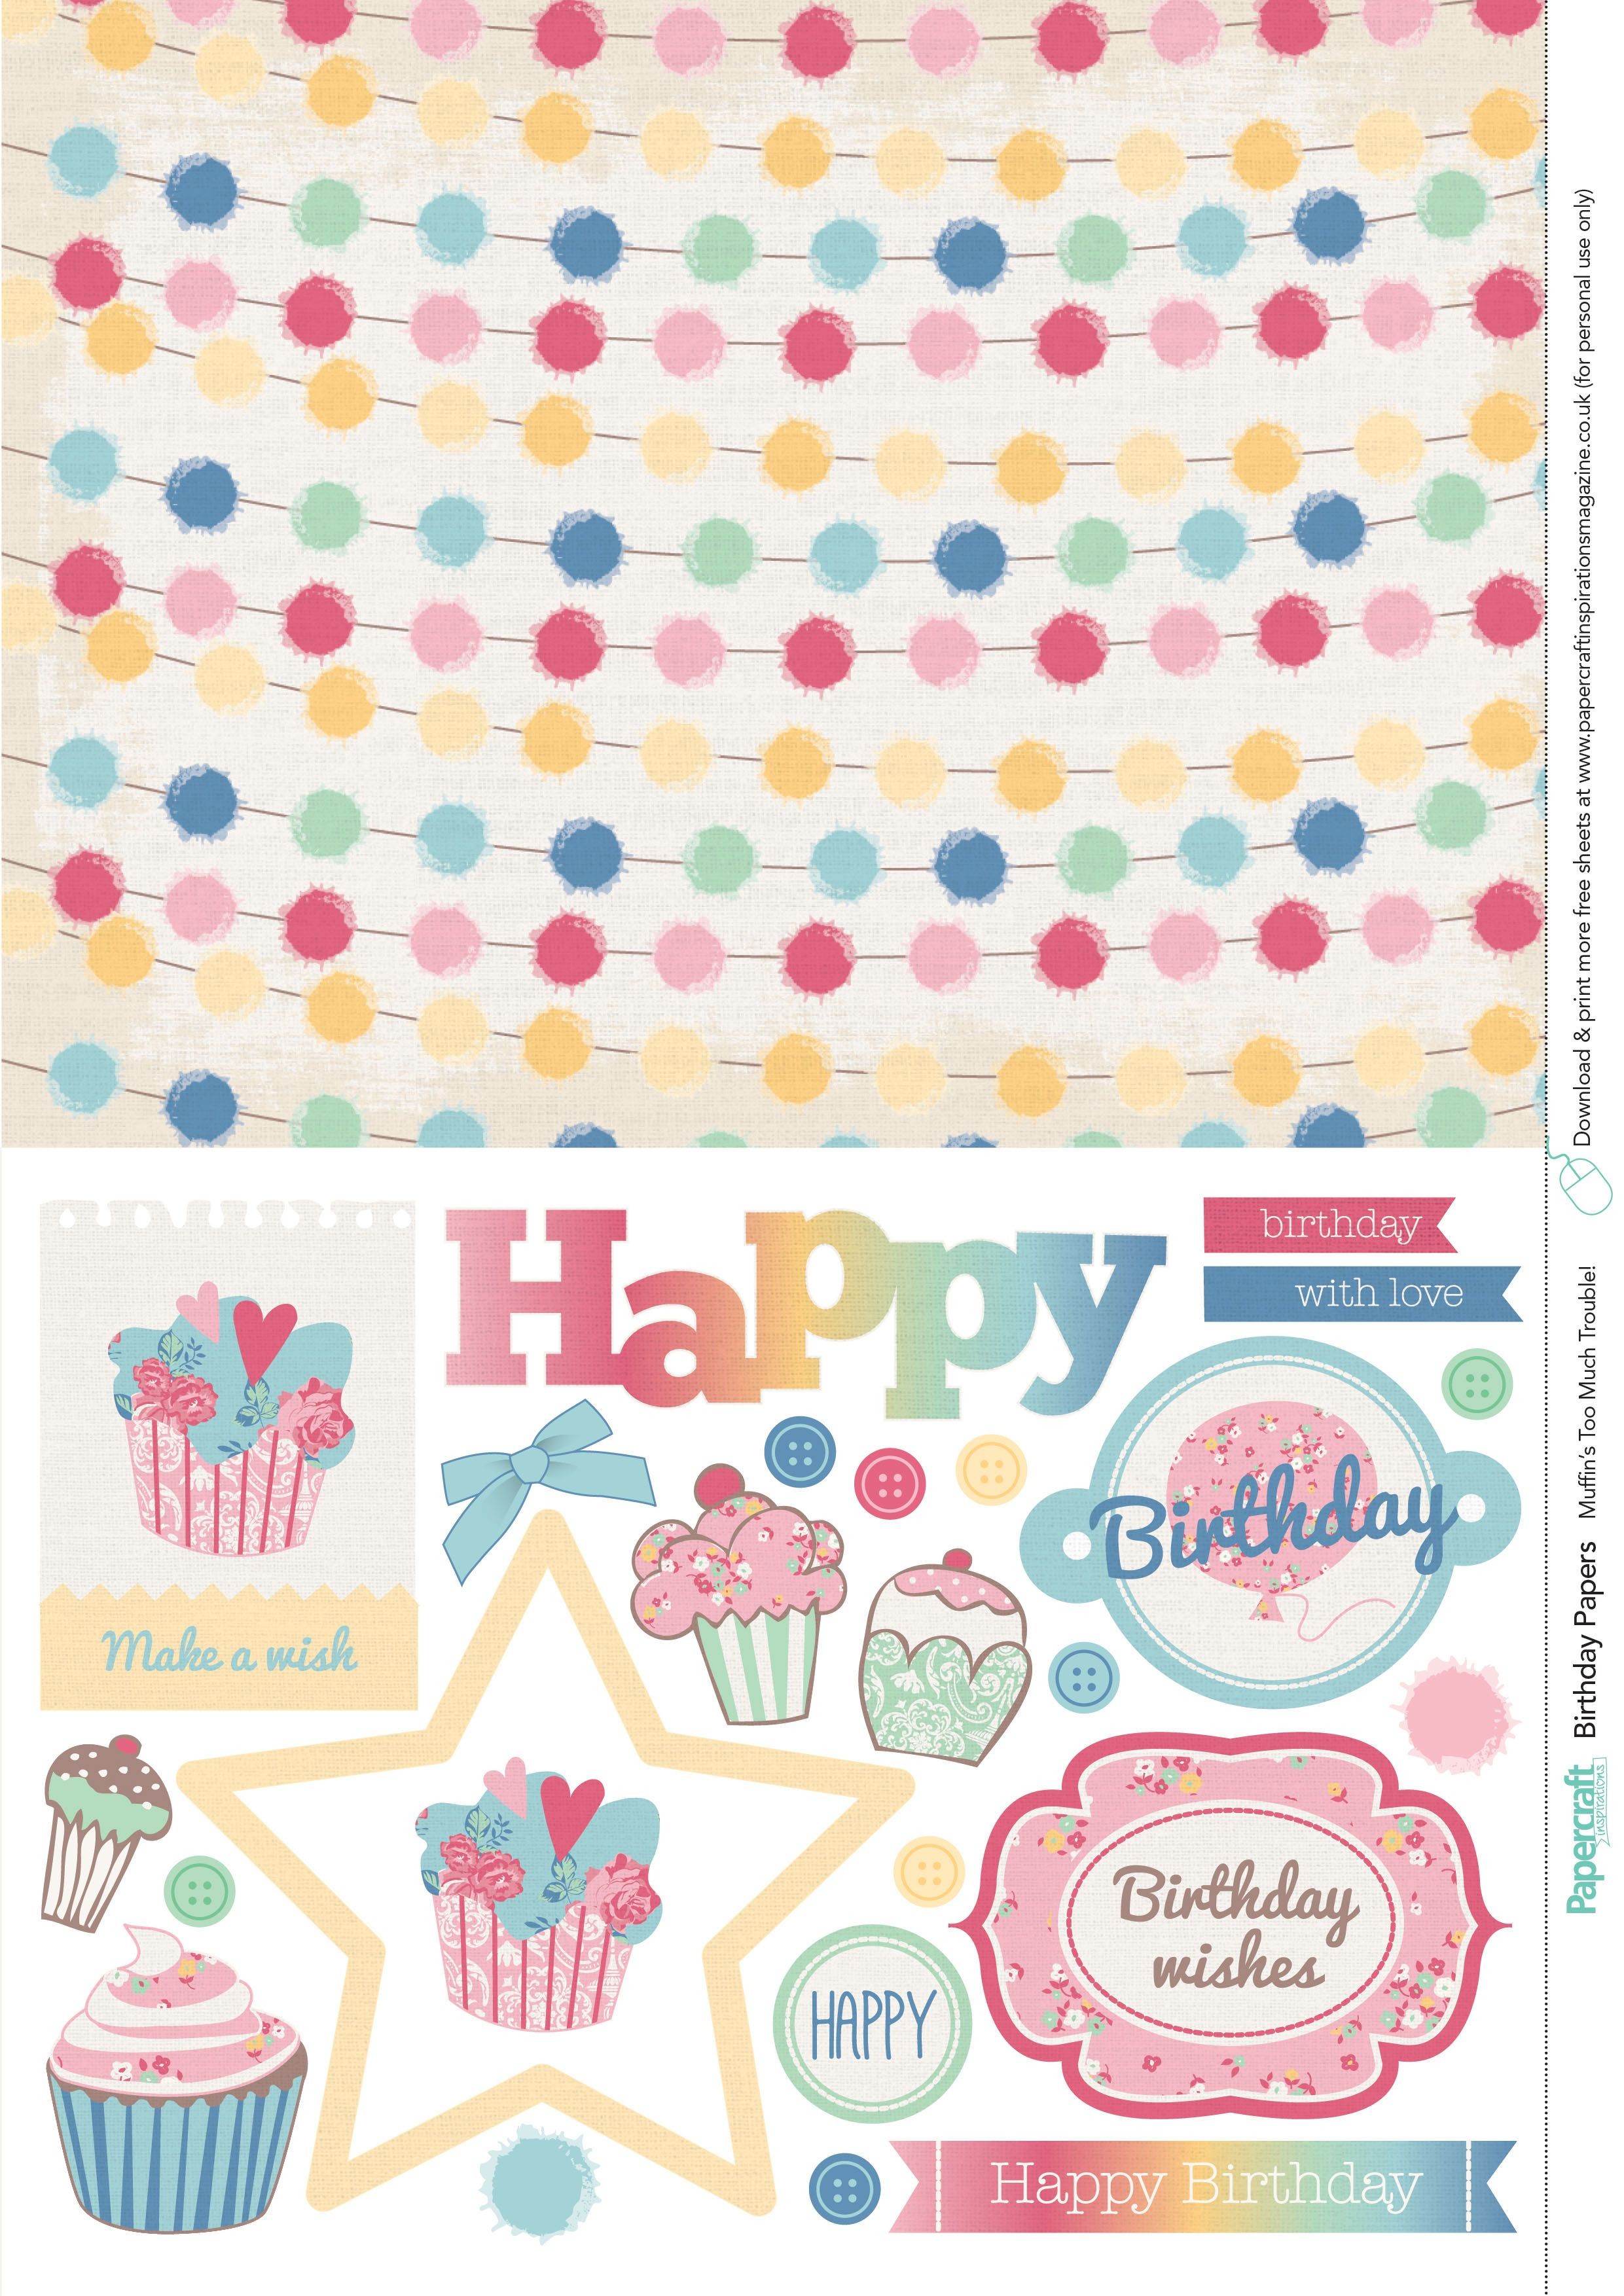 Minnie Mouse Papercraft Birthday Free Printable Papers From Papercraft Inspirations 151